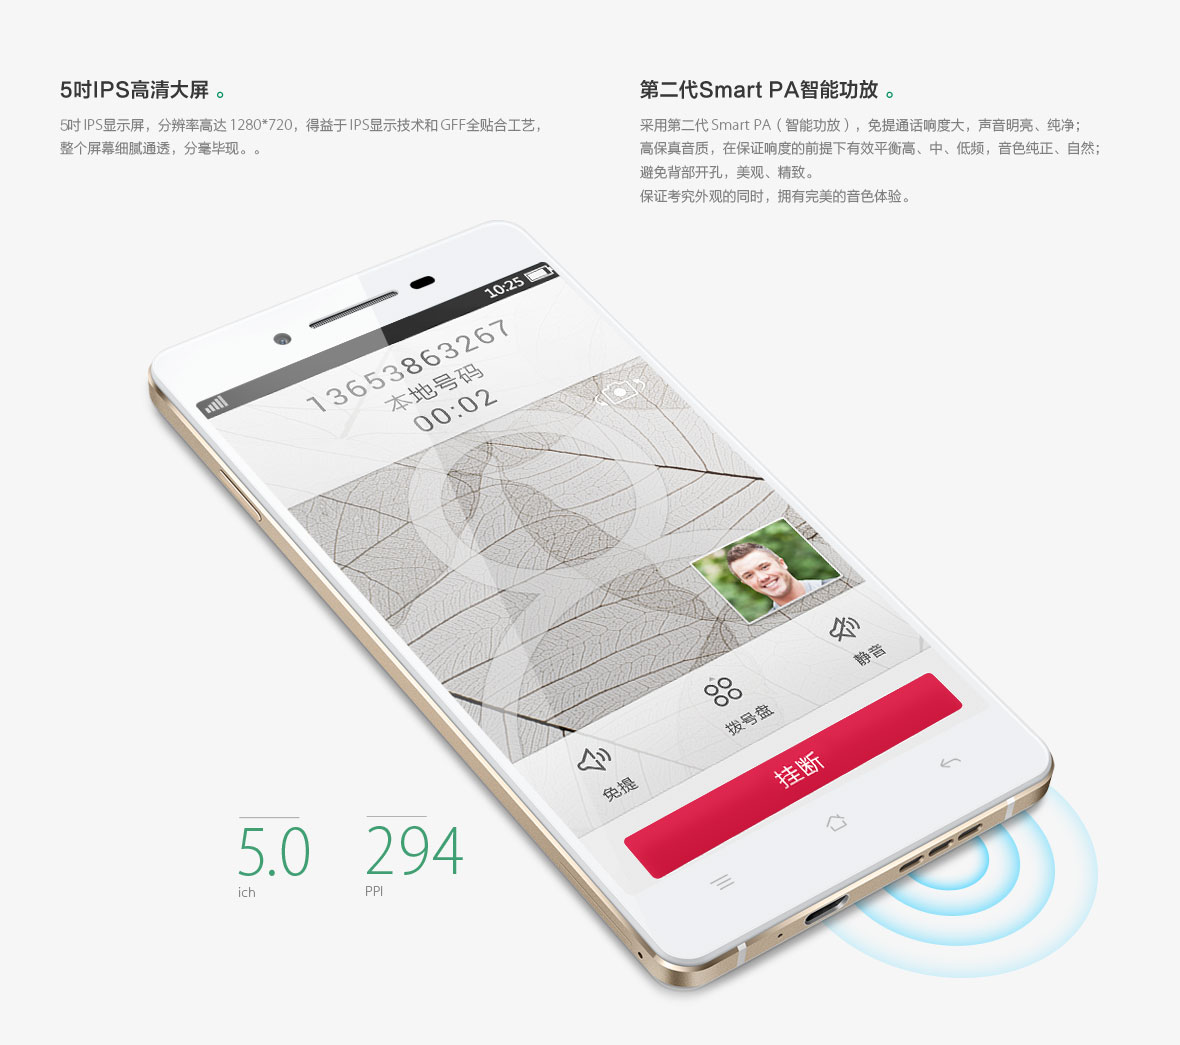 android-oppo-r1-r829t-image-6